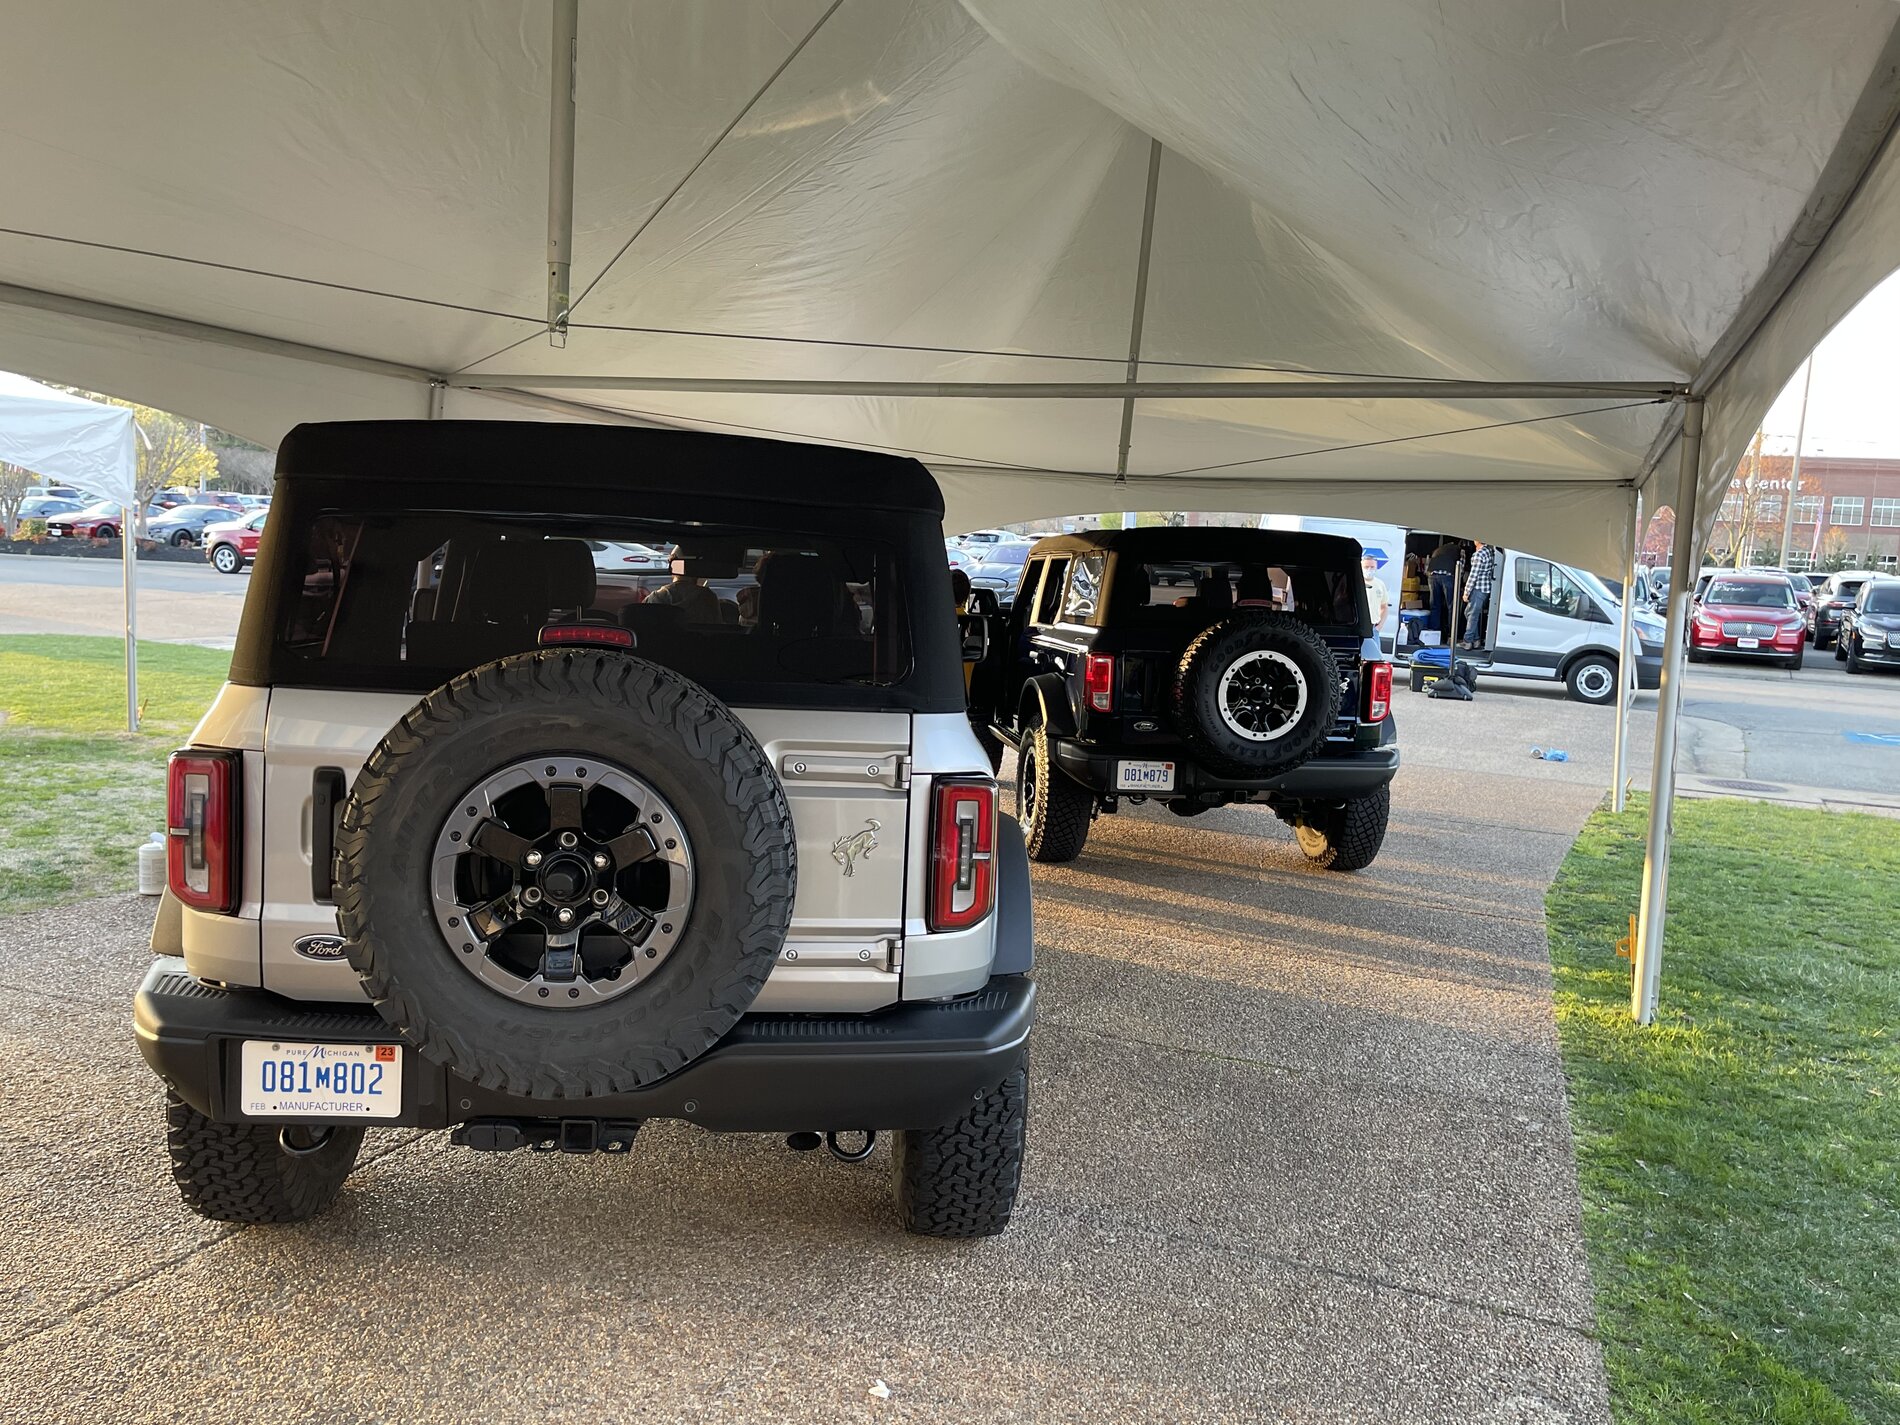 Ford Bronco Feedback & pics from  Bronco event in Richmond, Virginia: Badlands on 33's + Black Diamond 63DCCC9A-9BE2-444C-A945-71DEF262F80E